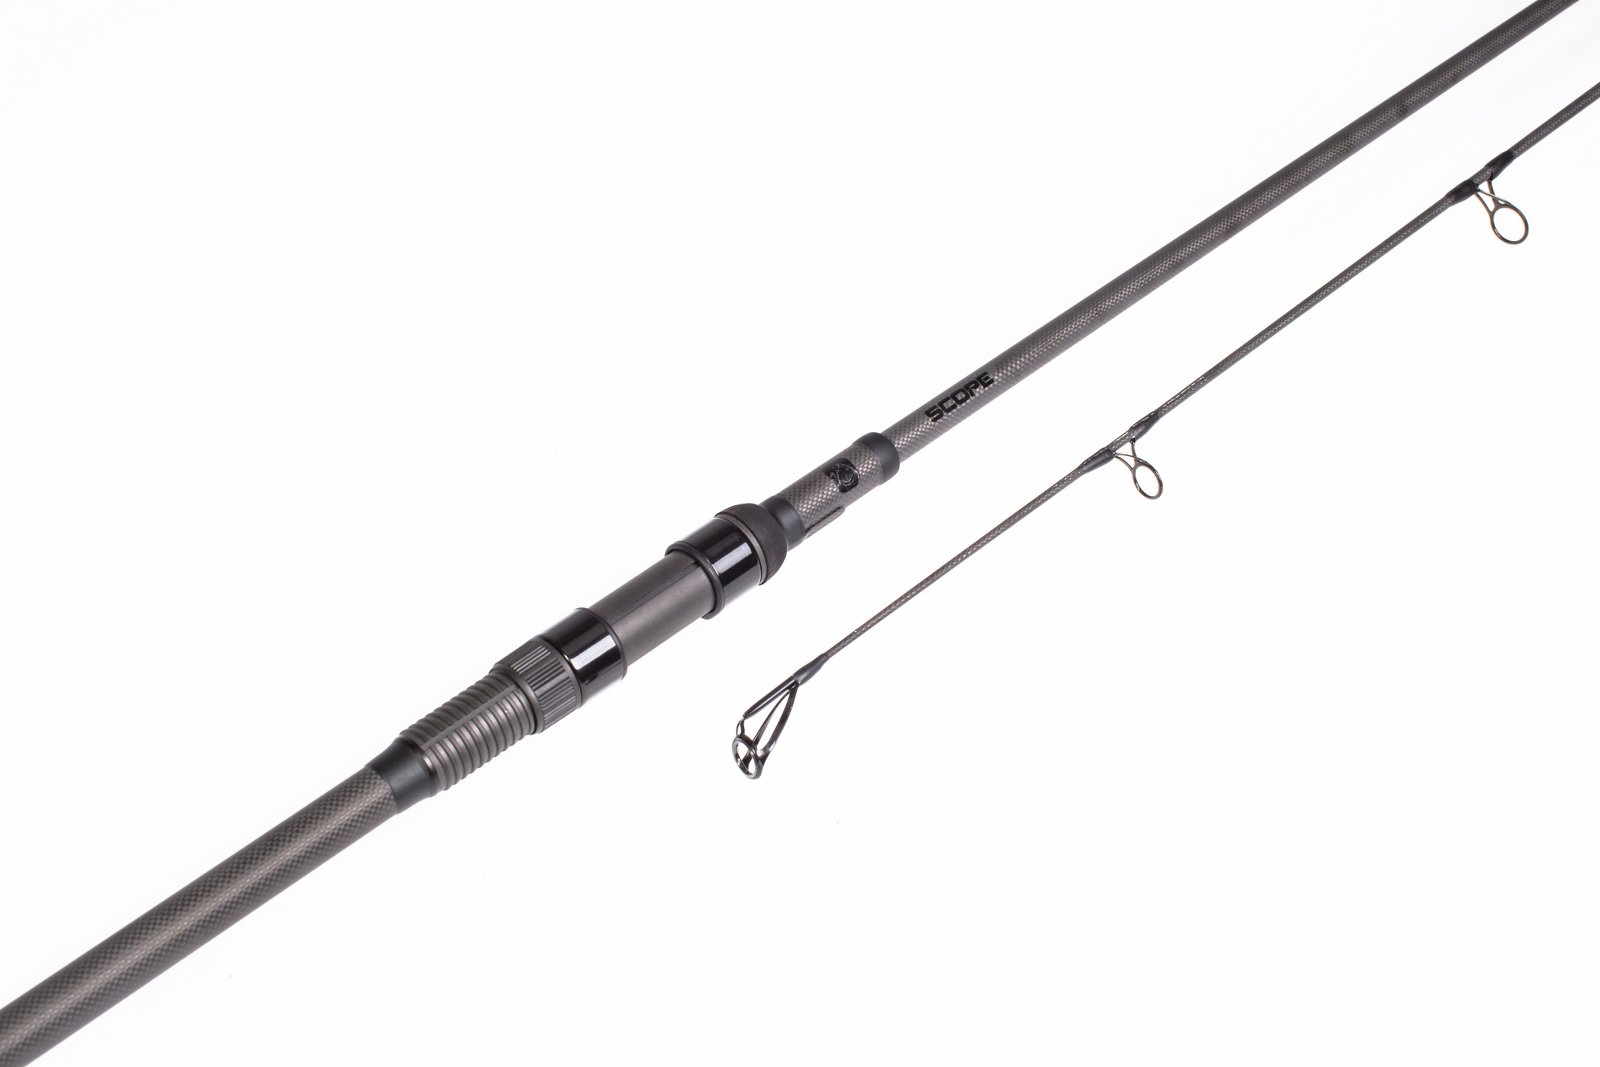 Nash Scope Abbreviated 9ft 4.5lb Scope Rods Tackle T1759 International Shop Europe